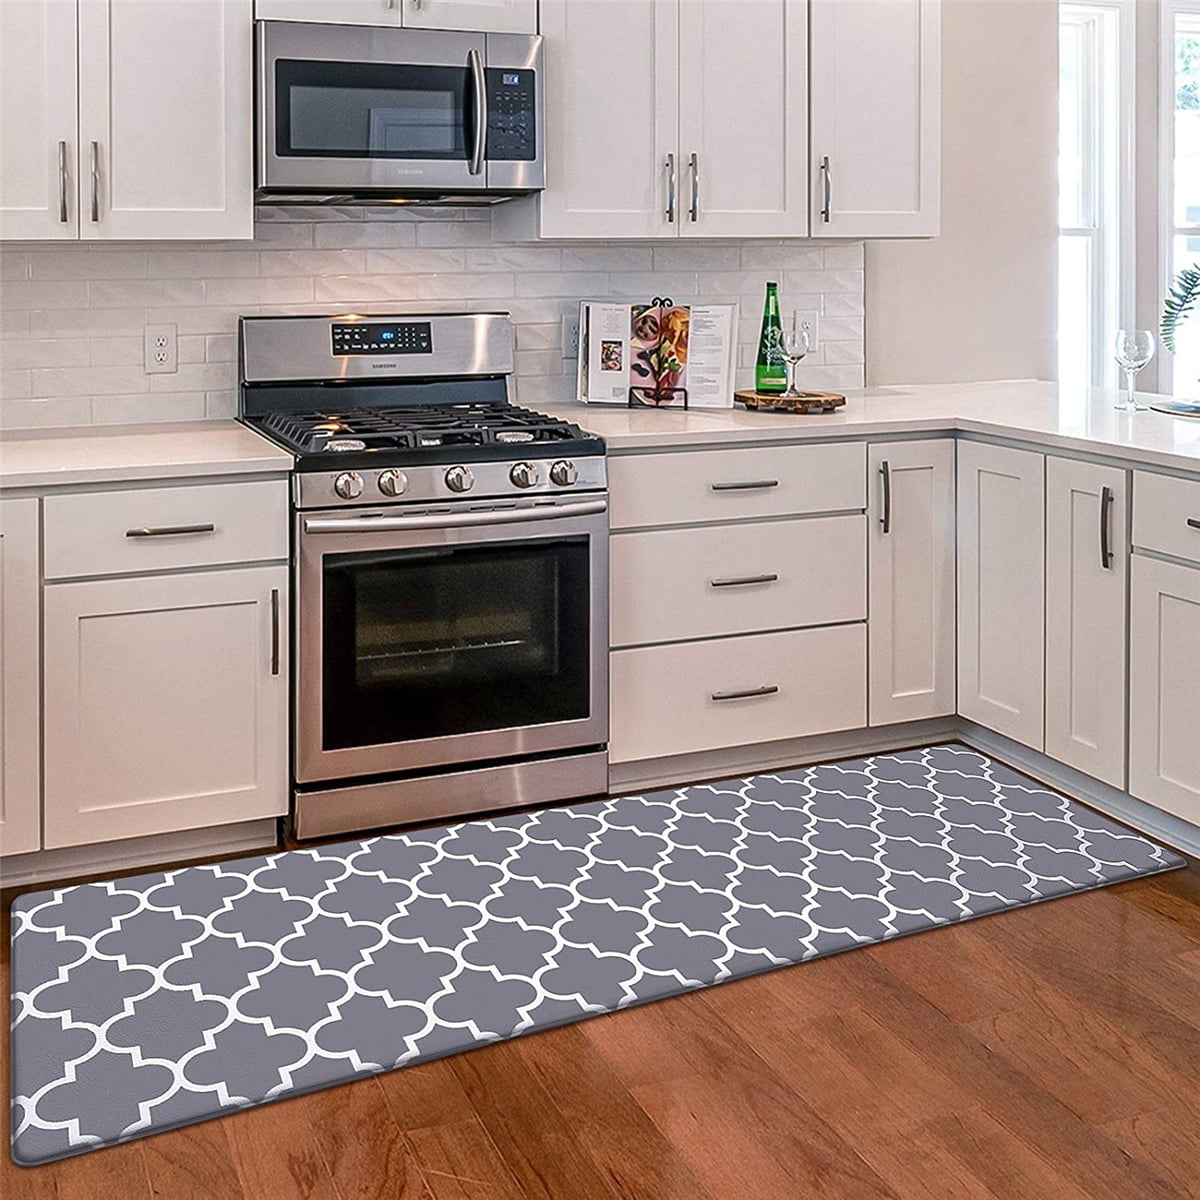 Chef Pattern Anti Fatigue Kitchen Rugs, Vintage Absorbent Non Slip  Cushioned Rugs, Stain Resistant Waterproof Long Strip Floor Mat, Comfort  Standing Mats, Living Room Bedroom Bathroom Kitchen Sink Laundry Office  Area Rugs